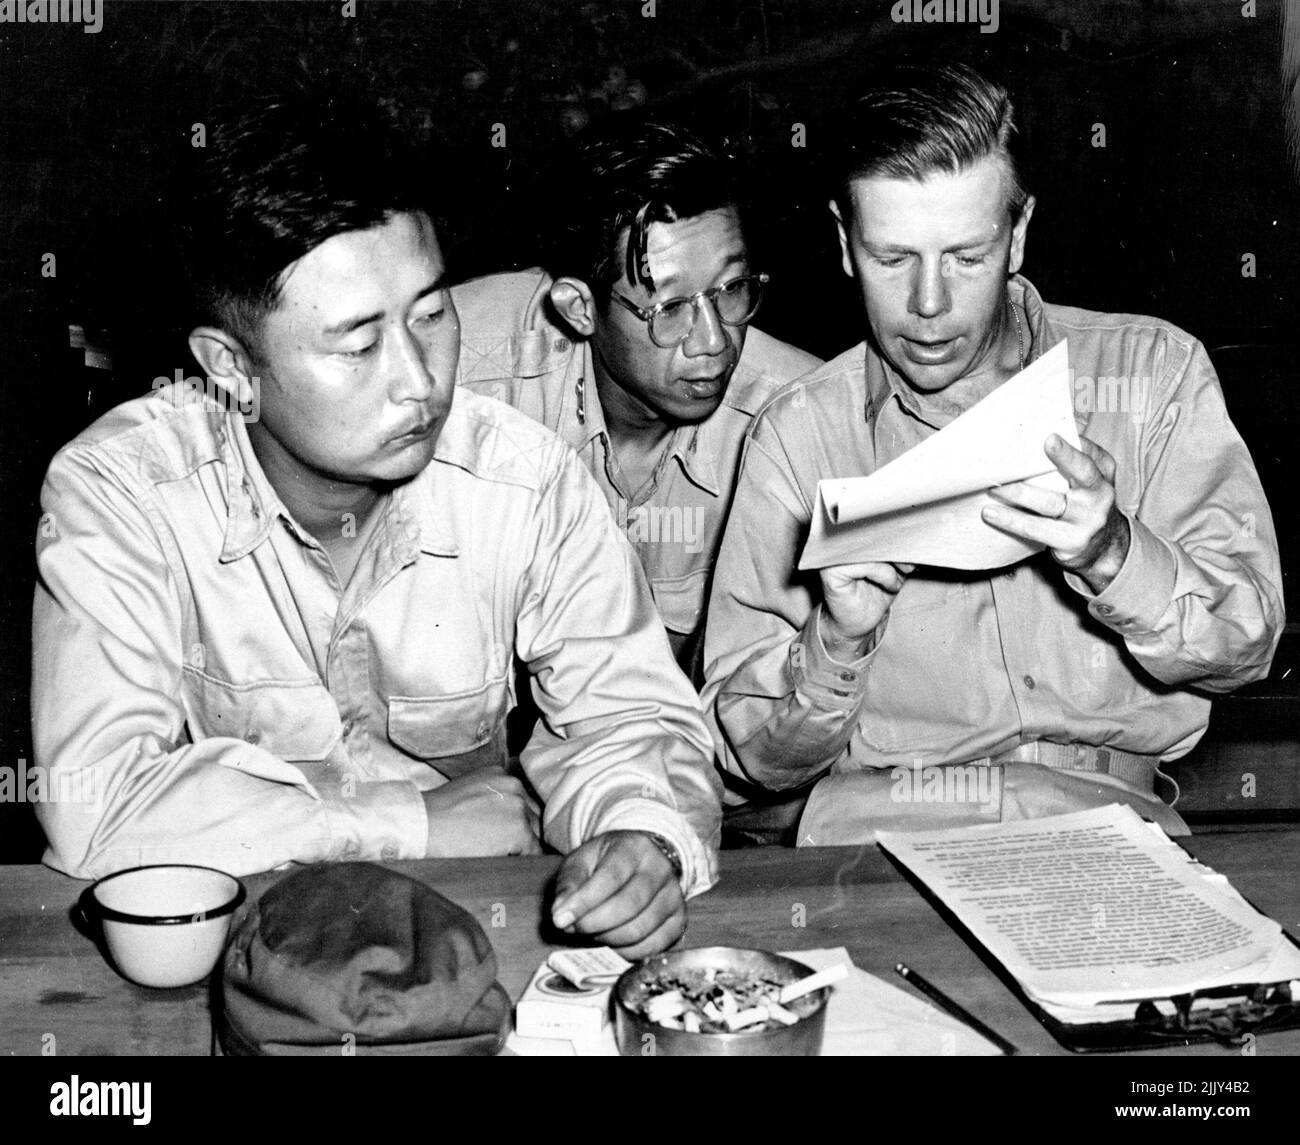 ROK Delegate Hears Translations - Maj. Gen. Paik Sun Yup, (left), ROK delegate to the UN coaso fire talks listens as Lt. Horace Underwood, USN (right) reads a translation at a nightly briefing session at Base Camp, Advance Headquarters, after a day session with communist delegates at Kaosong. Lt. Col. Lee, ROK, side to Gen. Paik, listens attentively. Lt. Underwood is one of the principal interpreters at the talks, handling great volumes of North Korean language translations. August 15, 1951. (Photo by U.S. Navy photo). Stock Photo